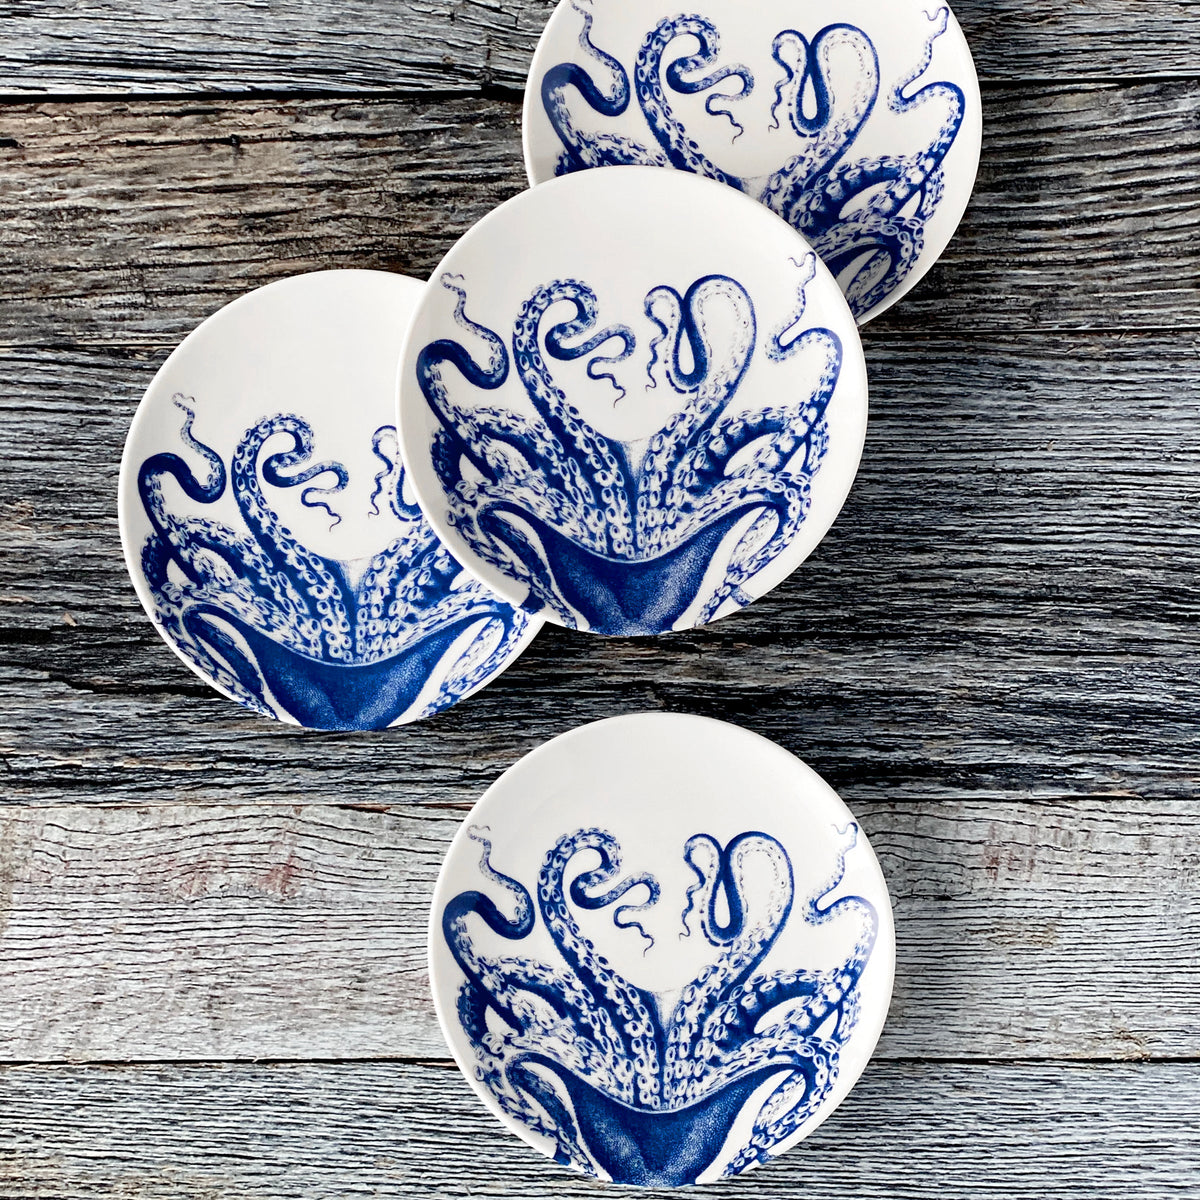 Four heirloom-quality Lucy Small Plates by Caskata Artisanal Home, featuring intricate blue octopus designs, are arranged beautifully on a textured wooden surface.